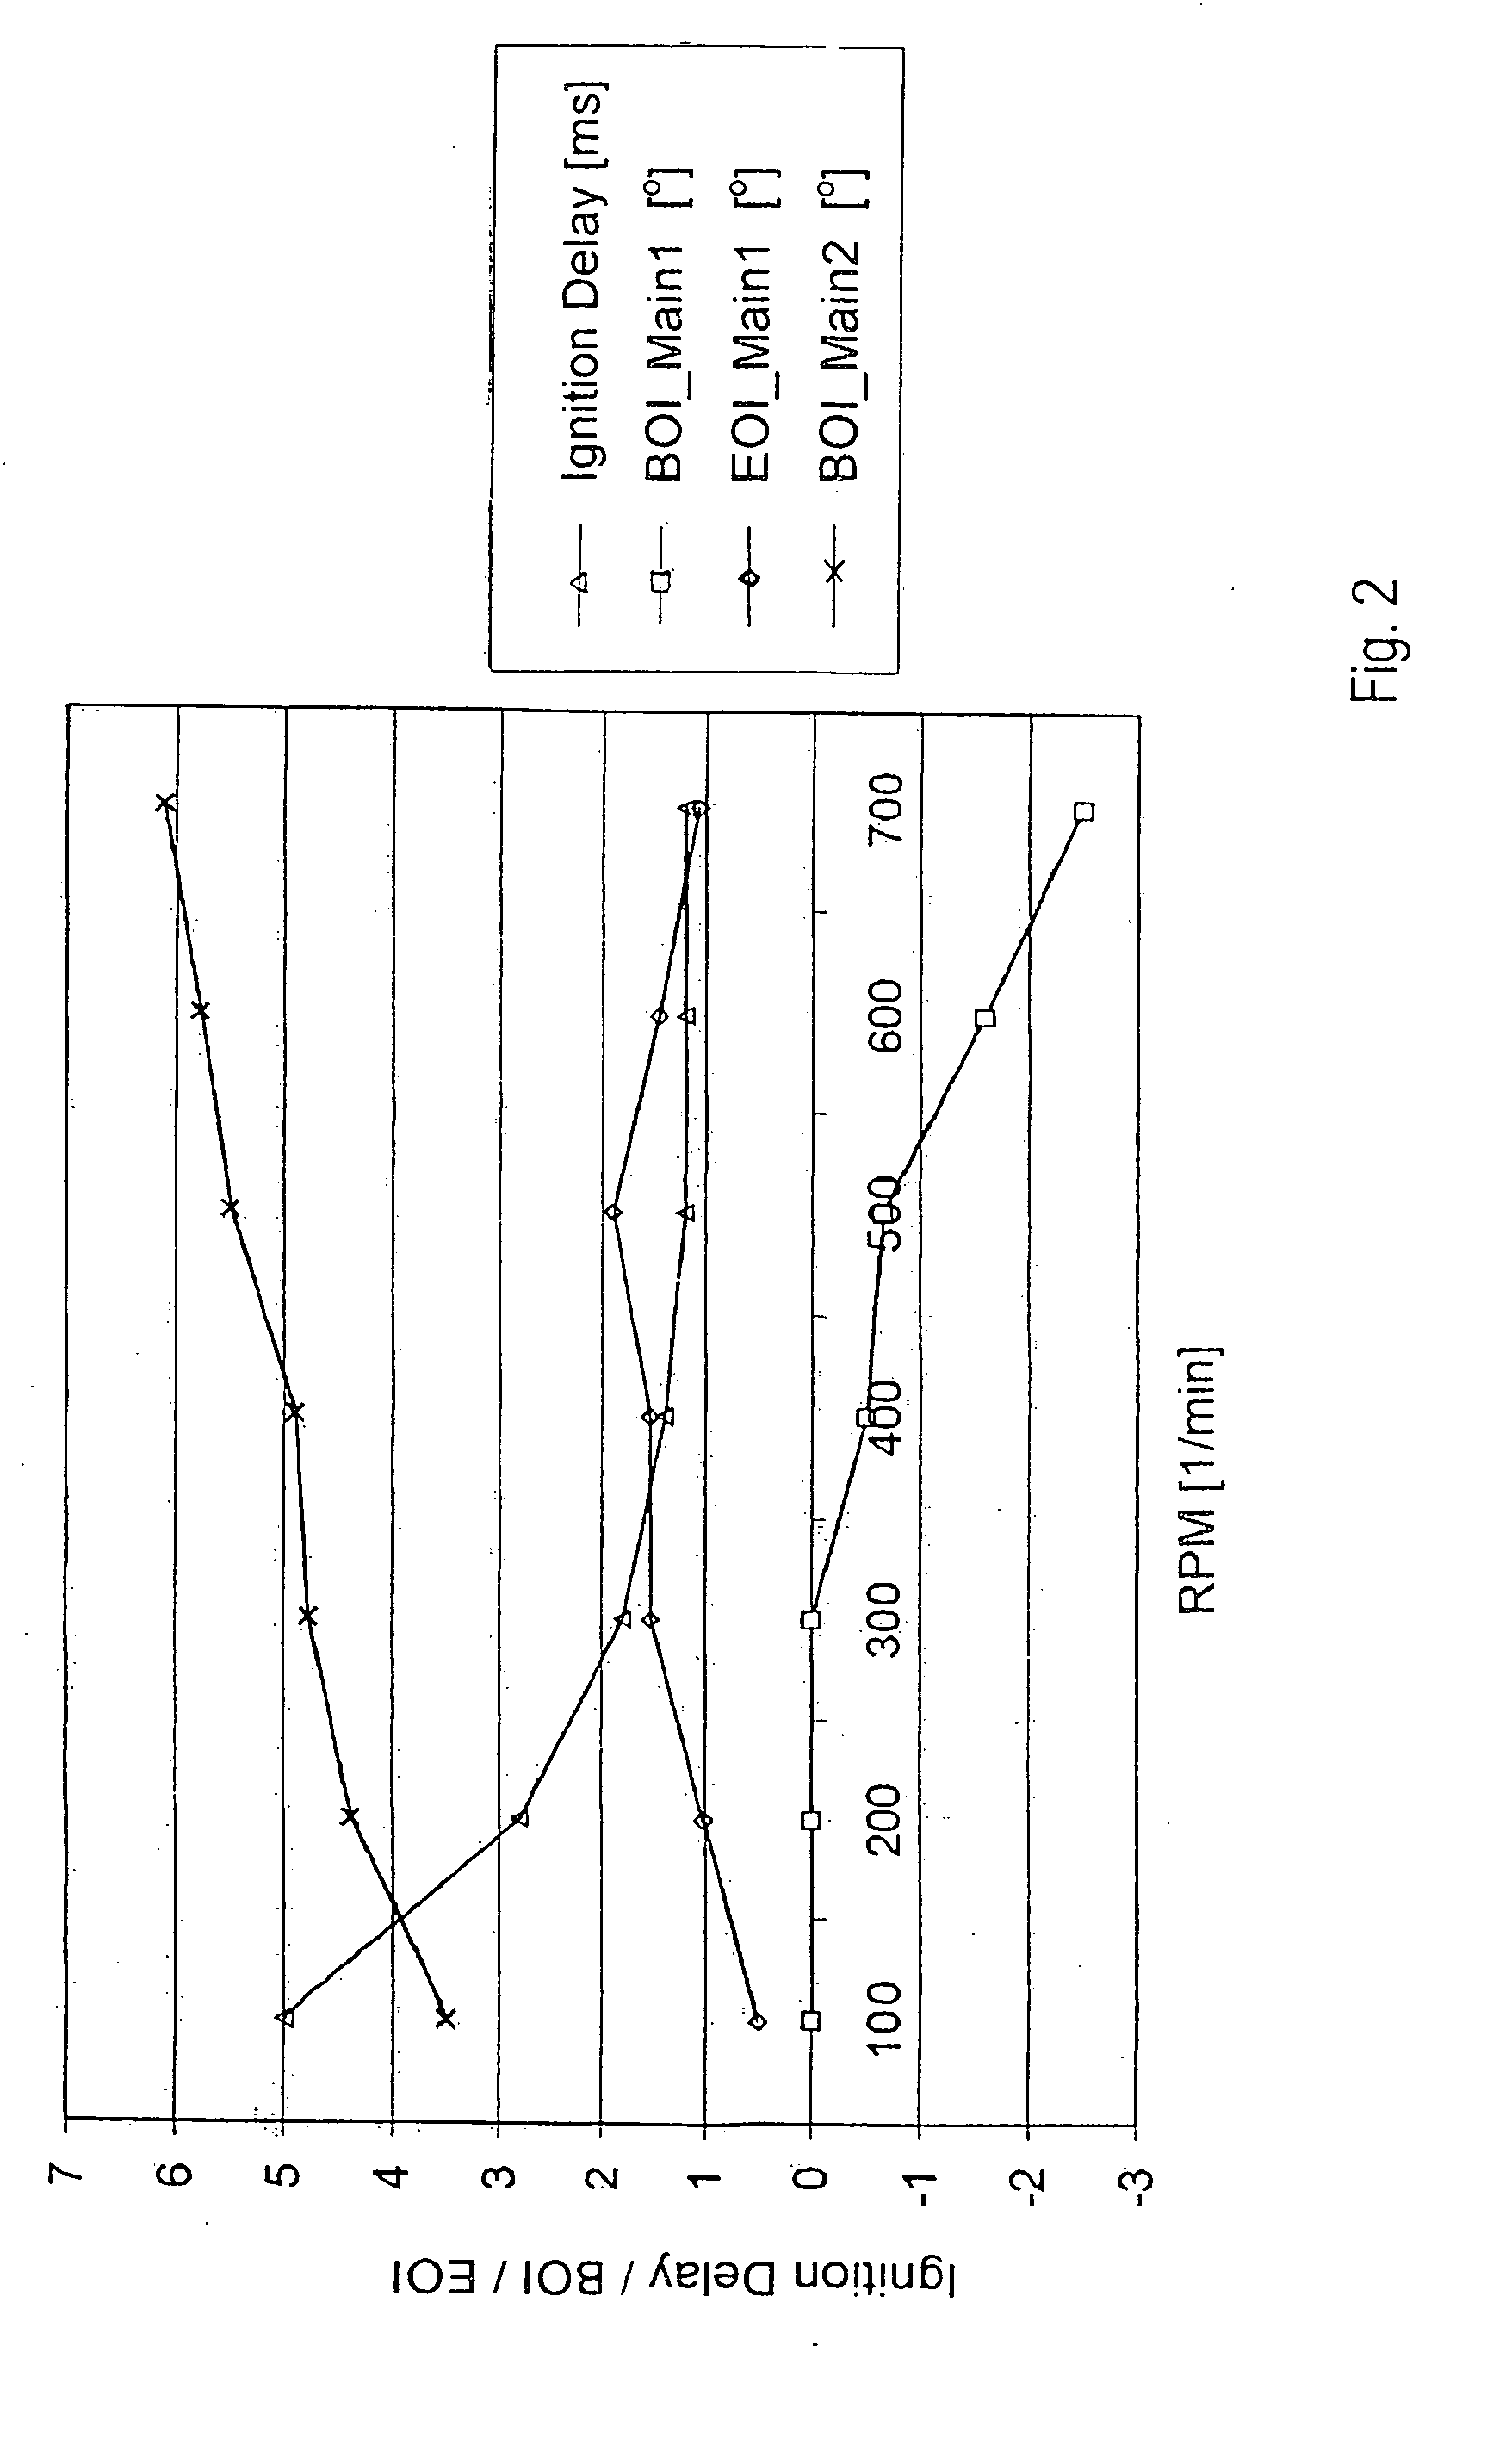 Method for starting a self-igniting internal combustion engine at low temperatures